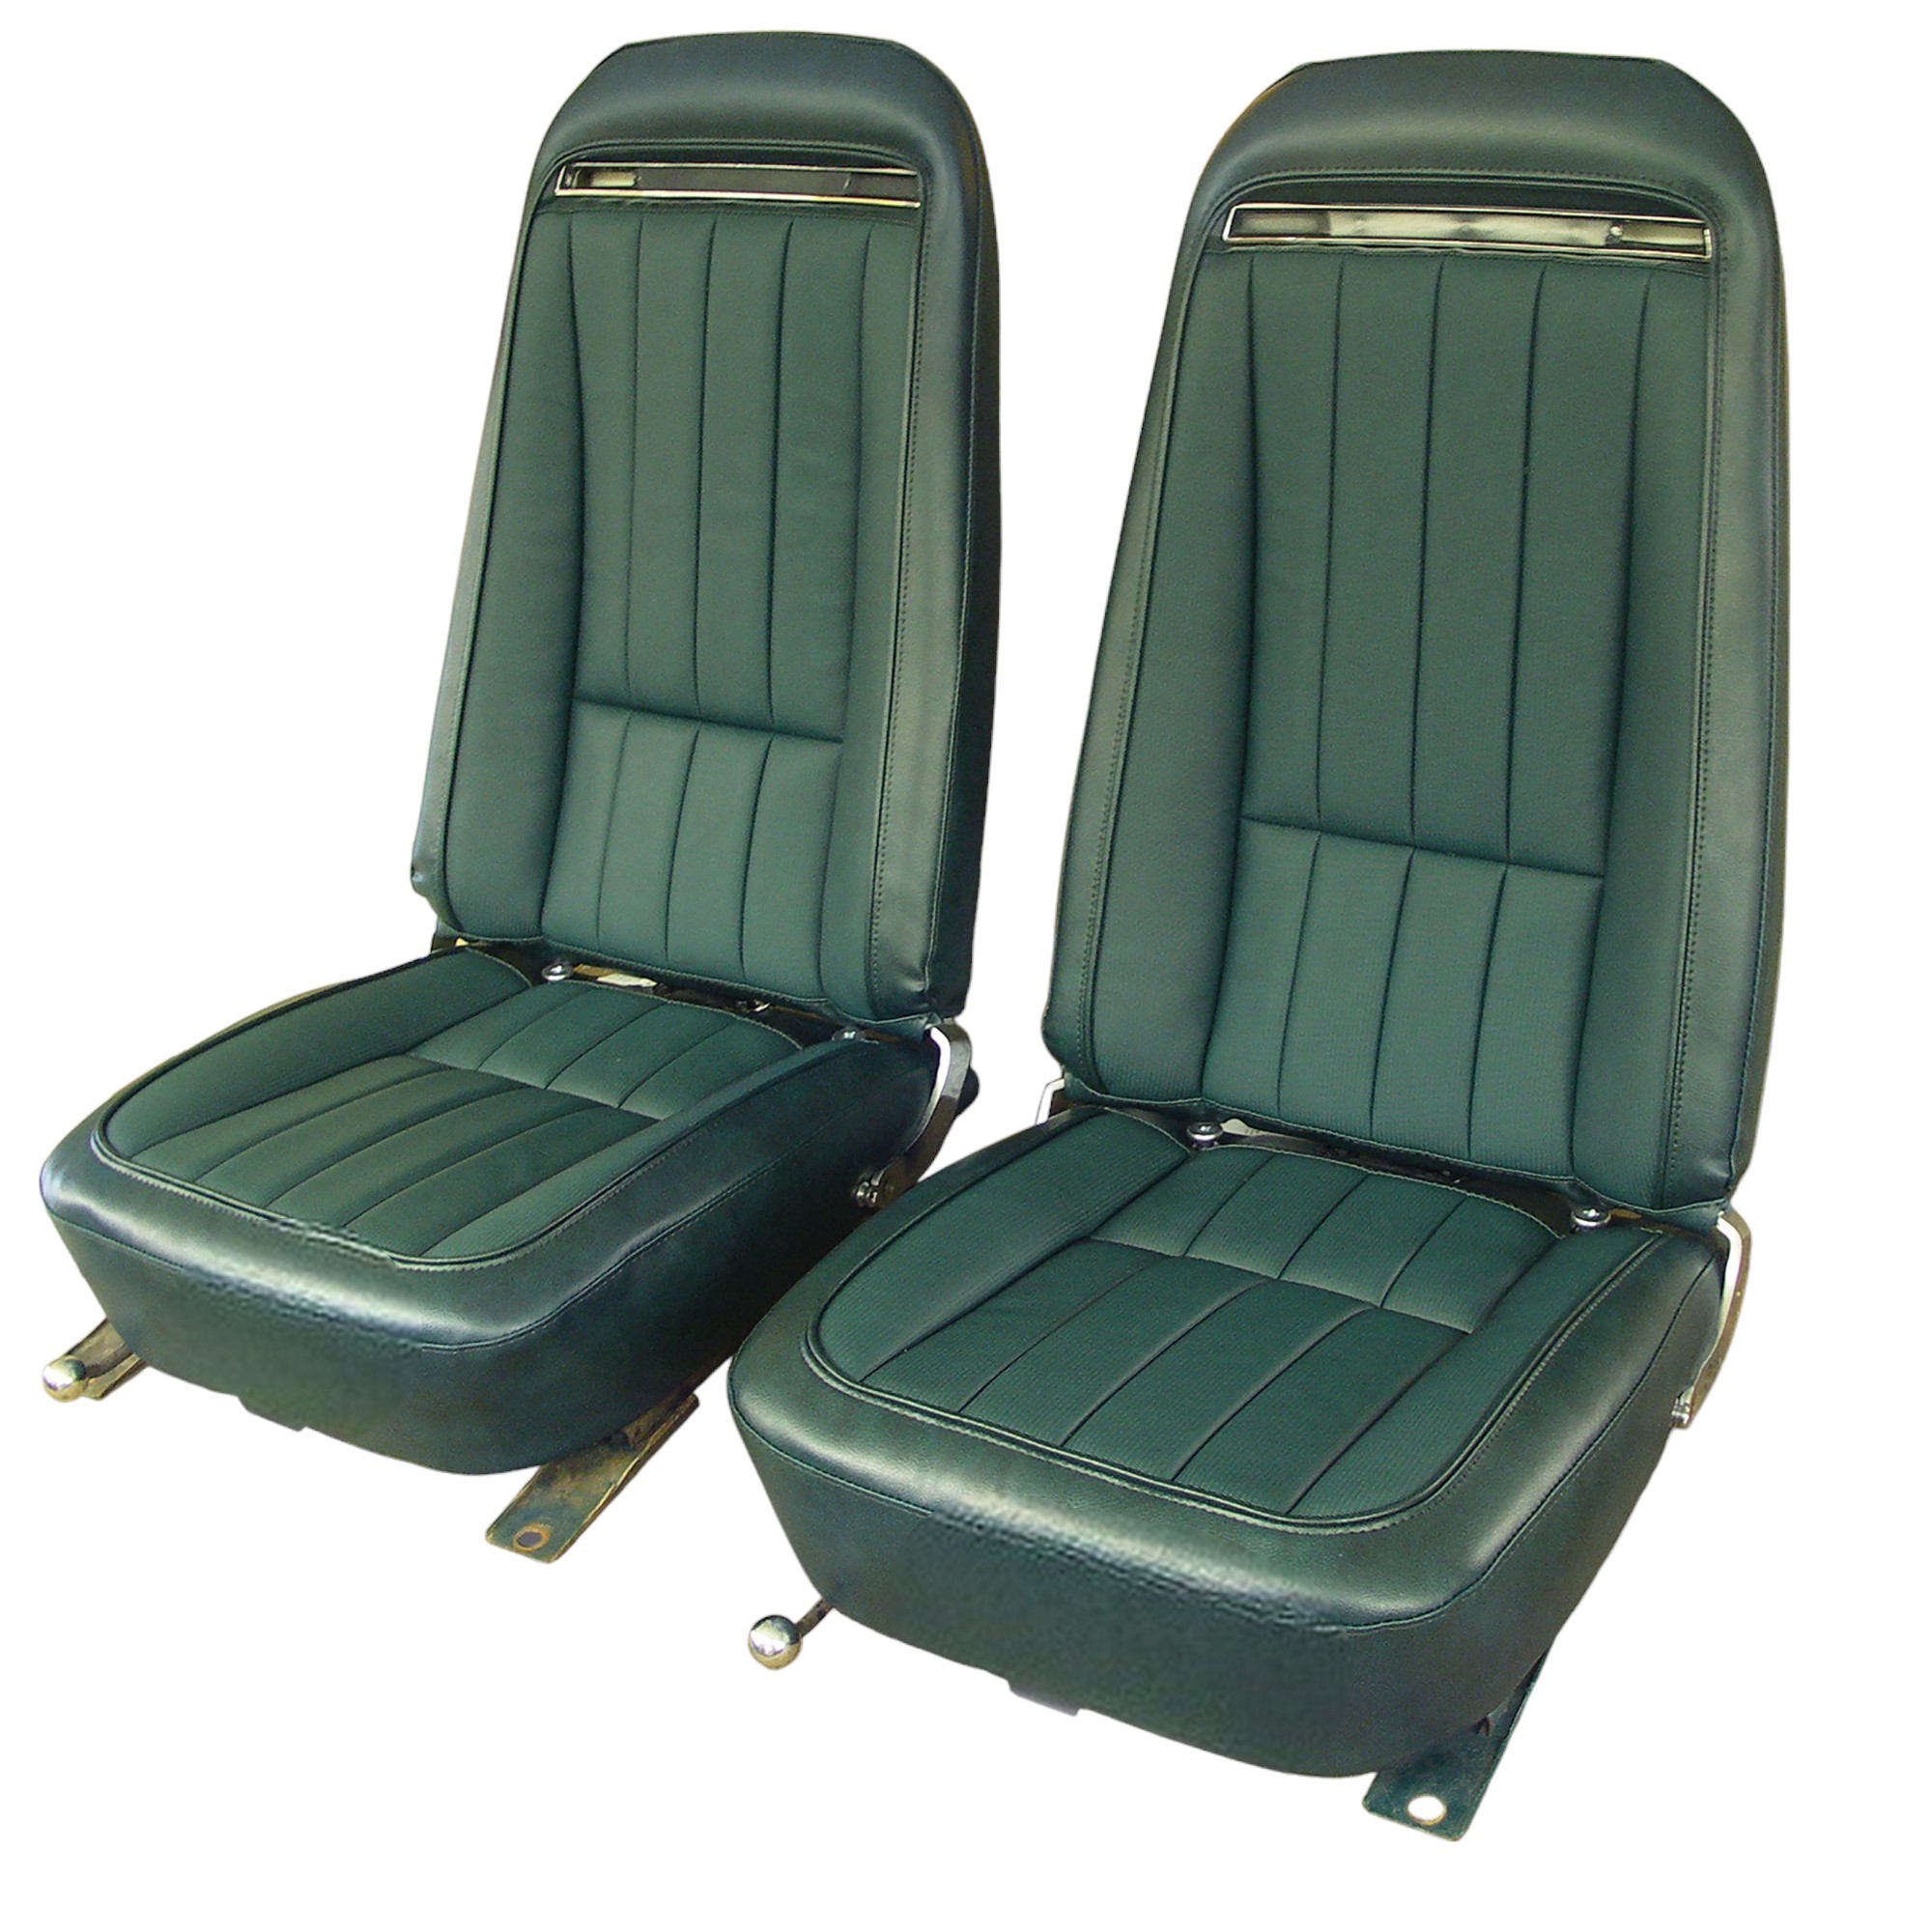 1971 C3 Corvette Mounted Seats Green "Leather-Like" Vinyl With Shoulder Harness